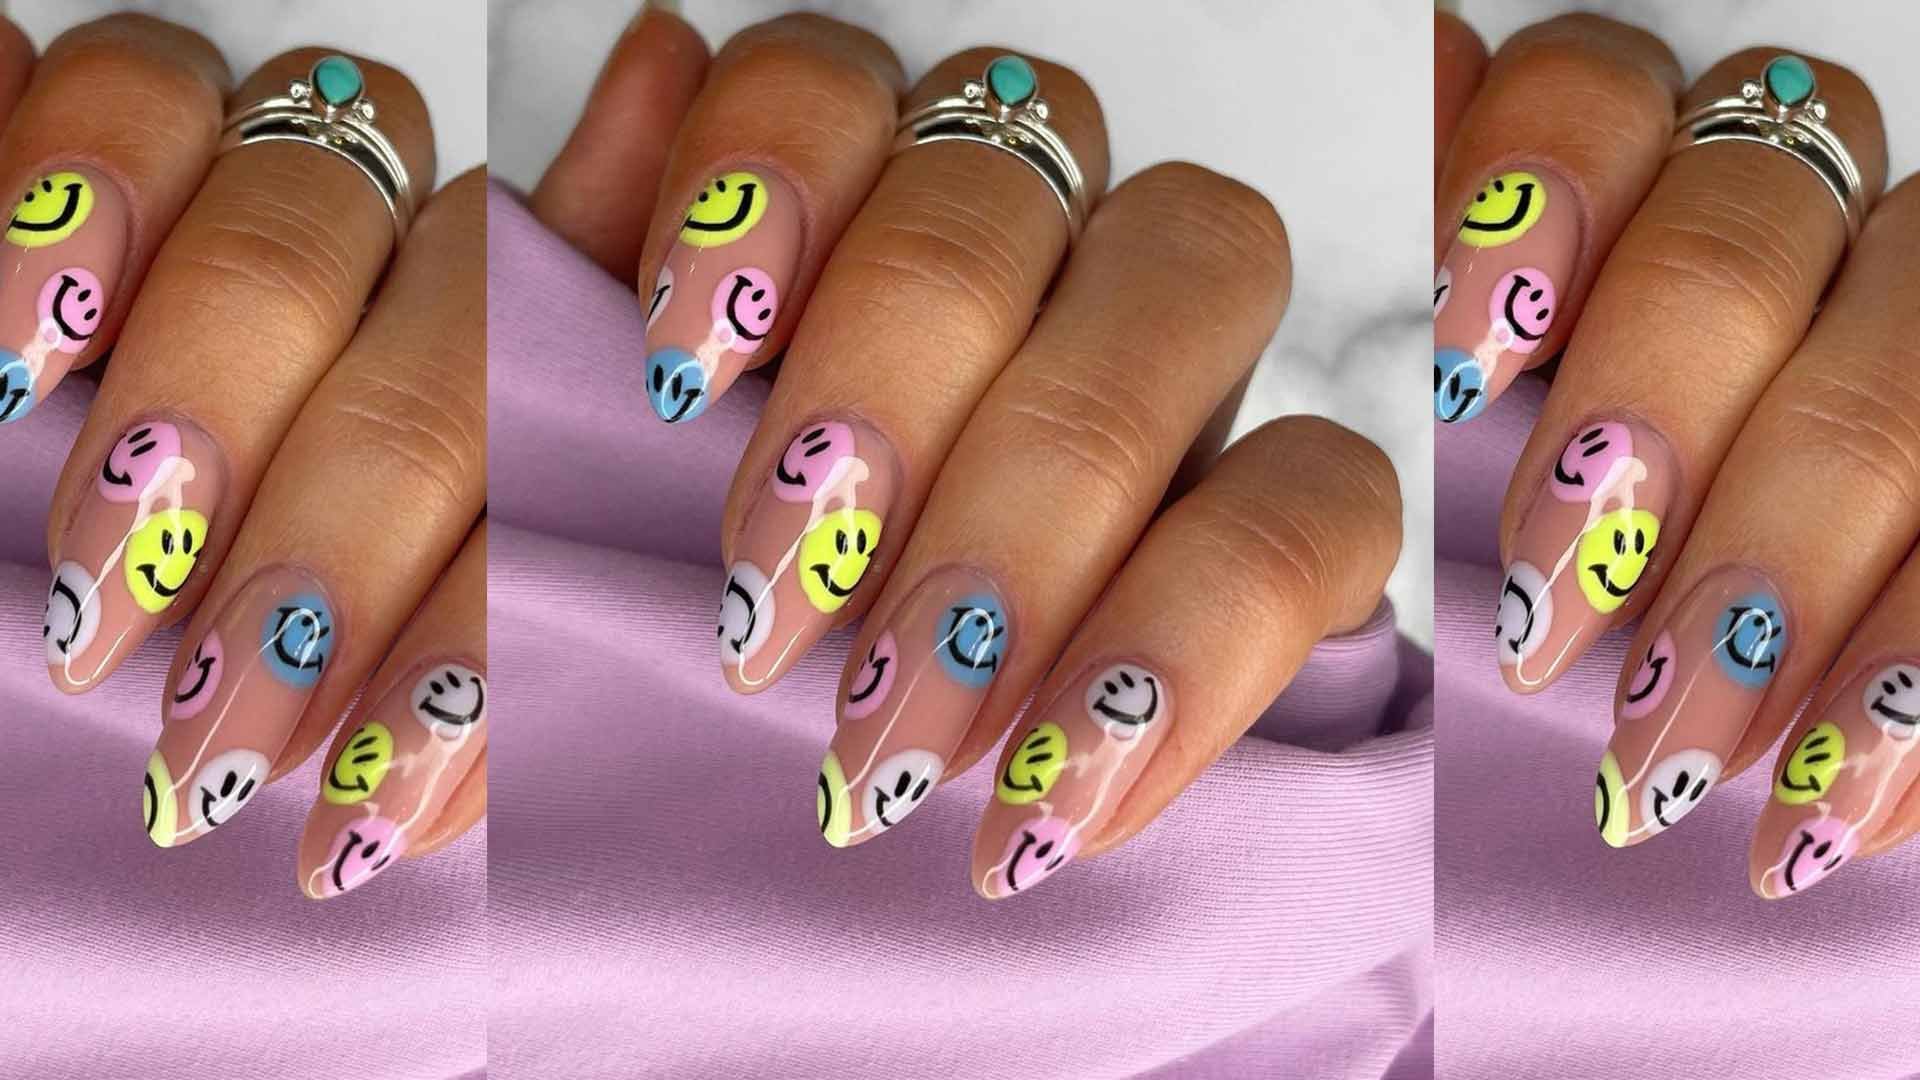 2. Cute Happy Face Nails - wide 8